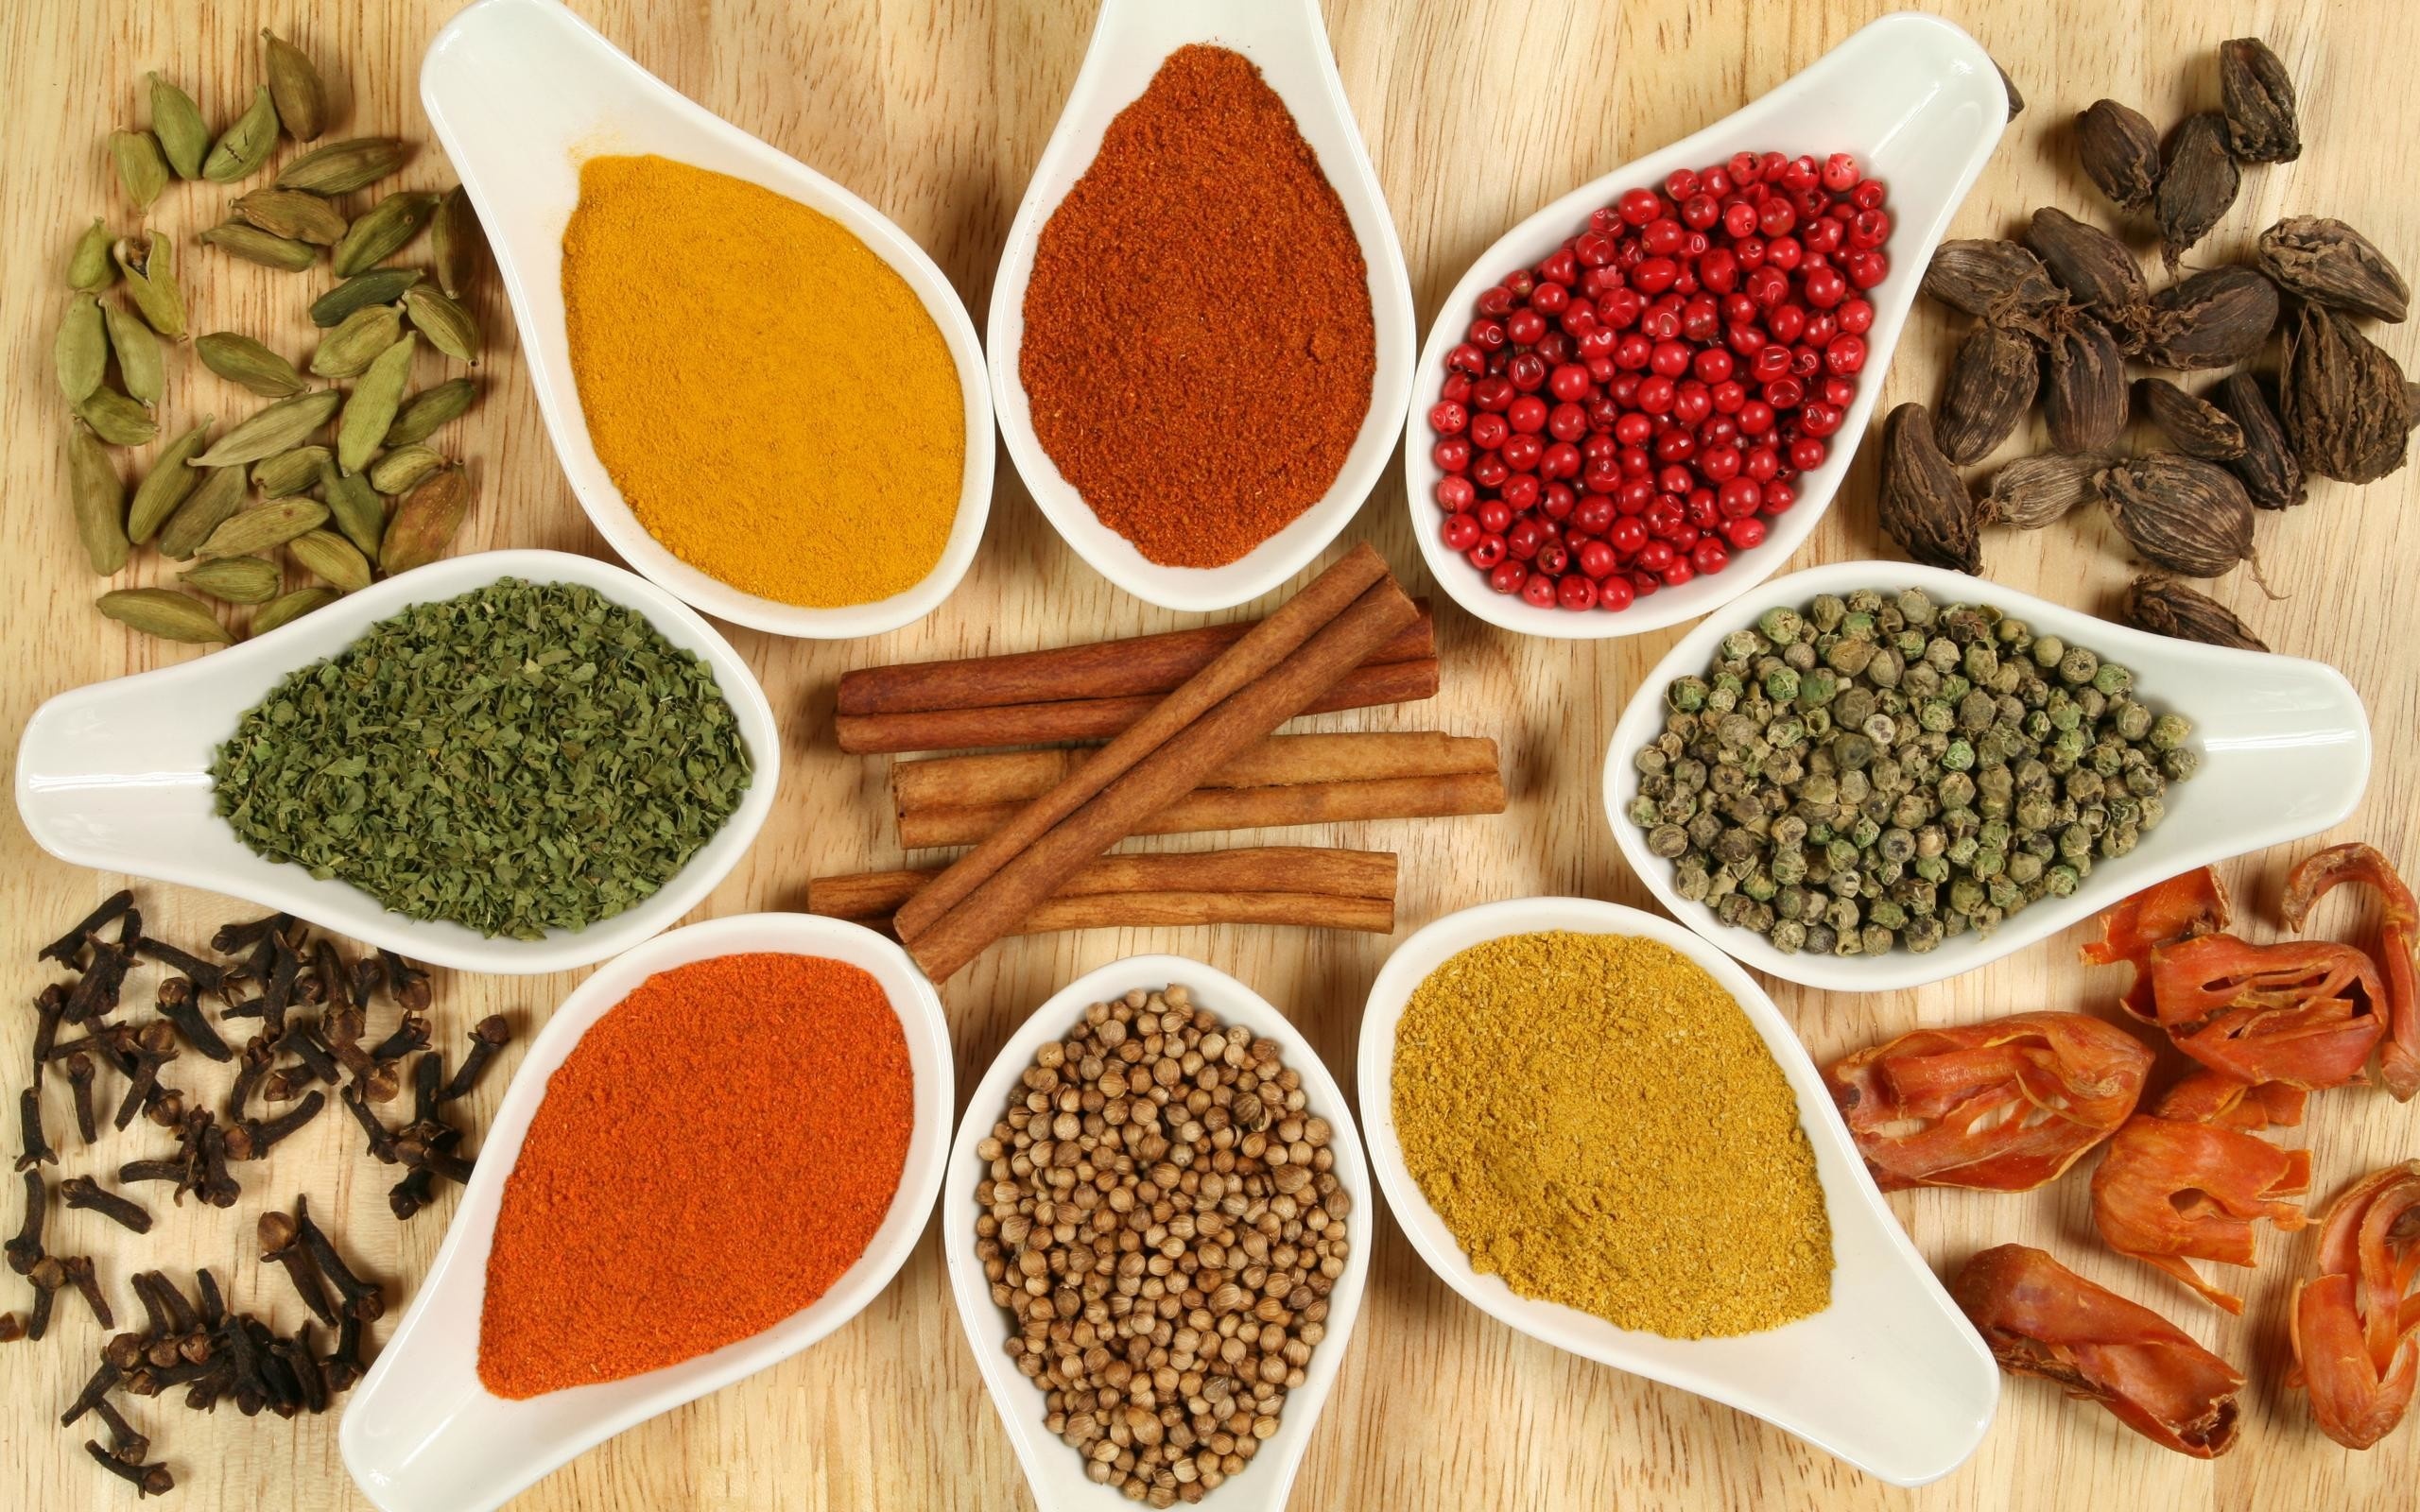 Spices: Used in medicine, religious rituals, cosmetics, or perfume production. 2560x1600 HD Wallpaper.